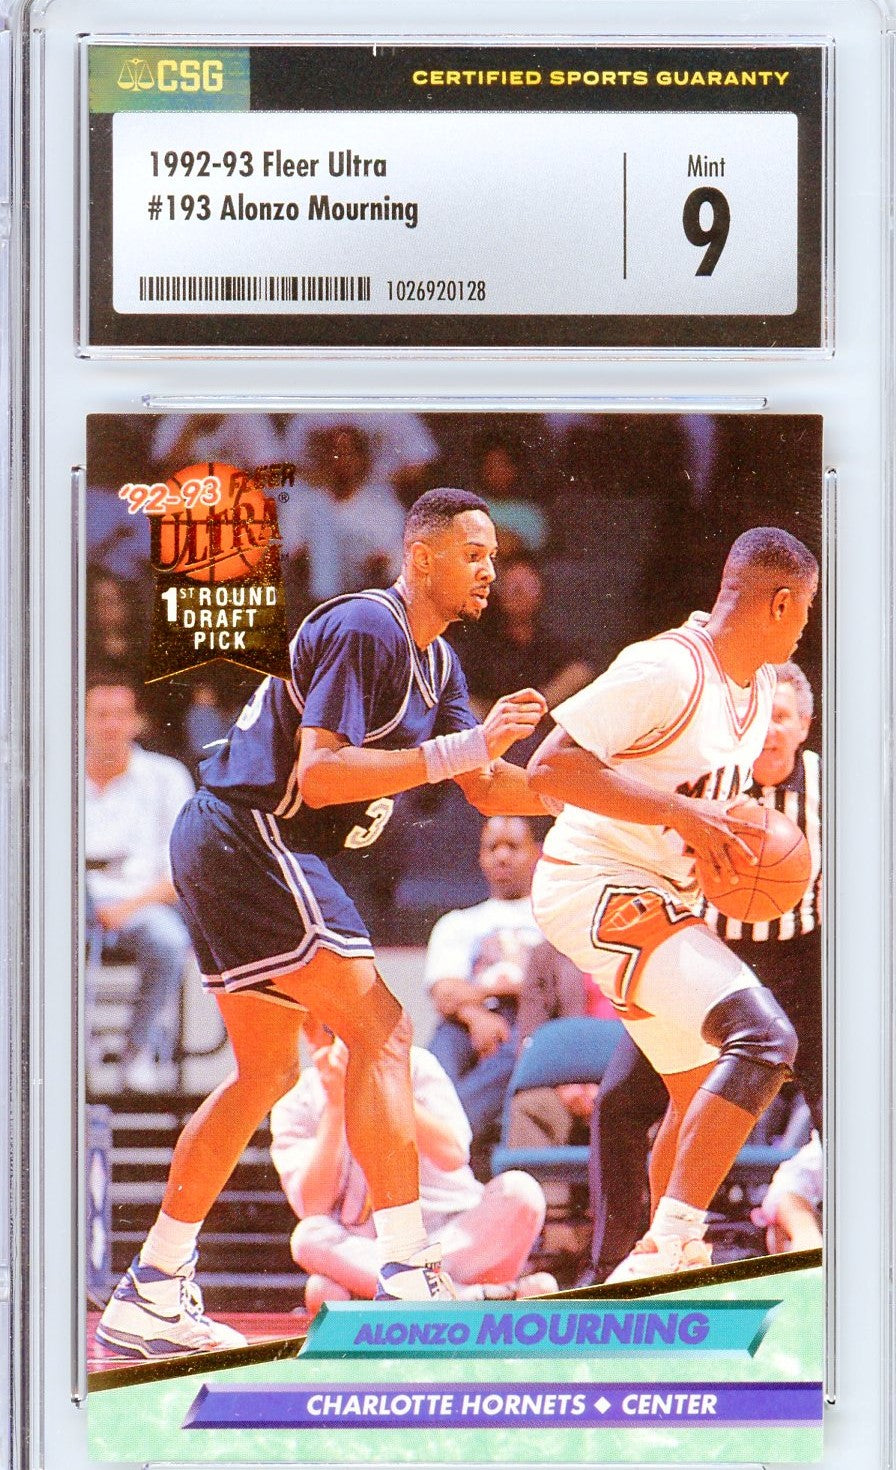 1992-93 Fleer Ultra #193 Alonzo Mourning Rookie Card CSG 9